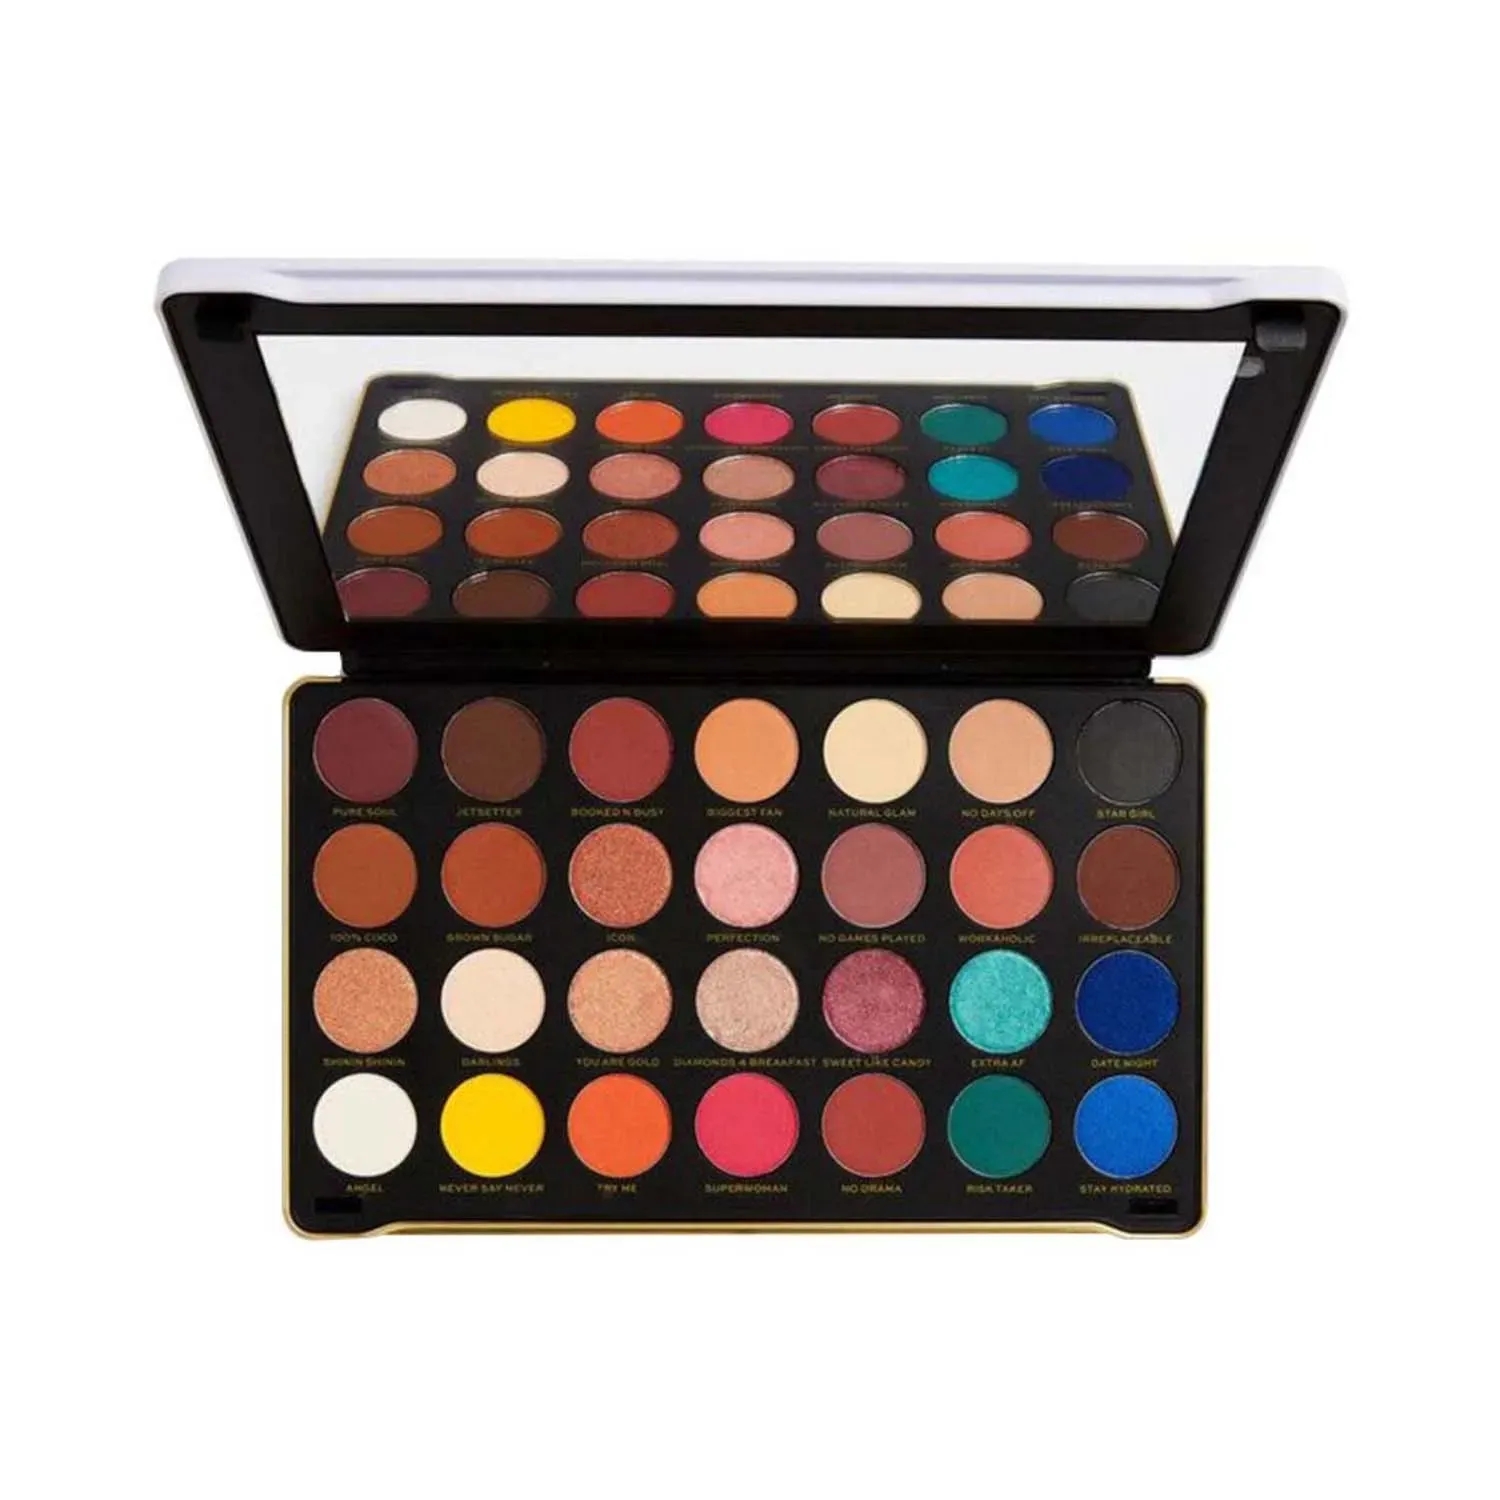 Makeup Revolution | Makeup Revolution X Patricia Bright Rich In Life Eyeshadow Palette - Multi-Colour (33.6g)